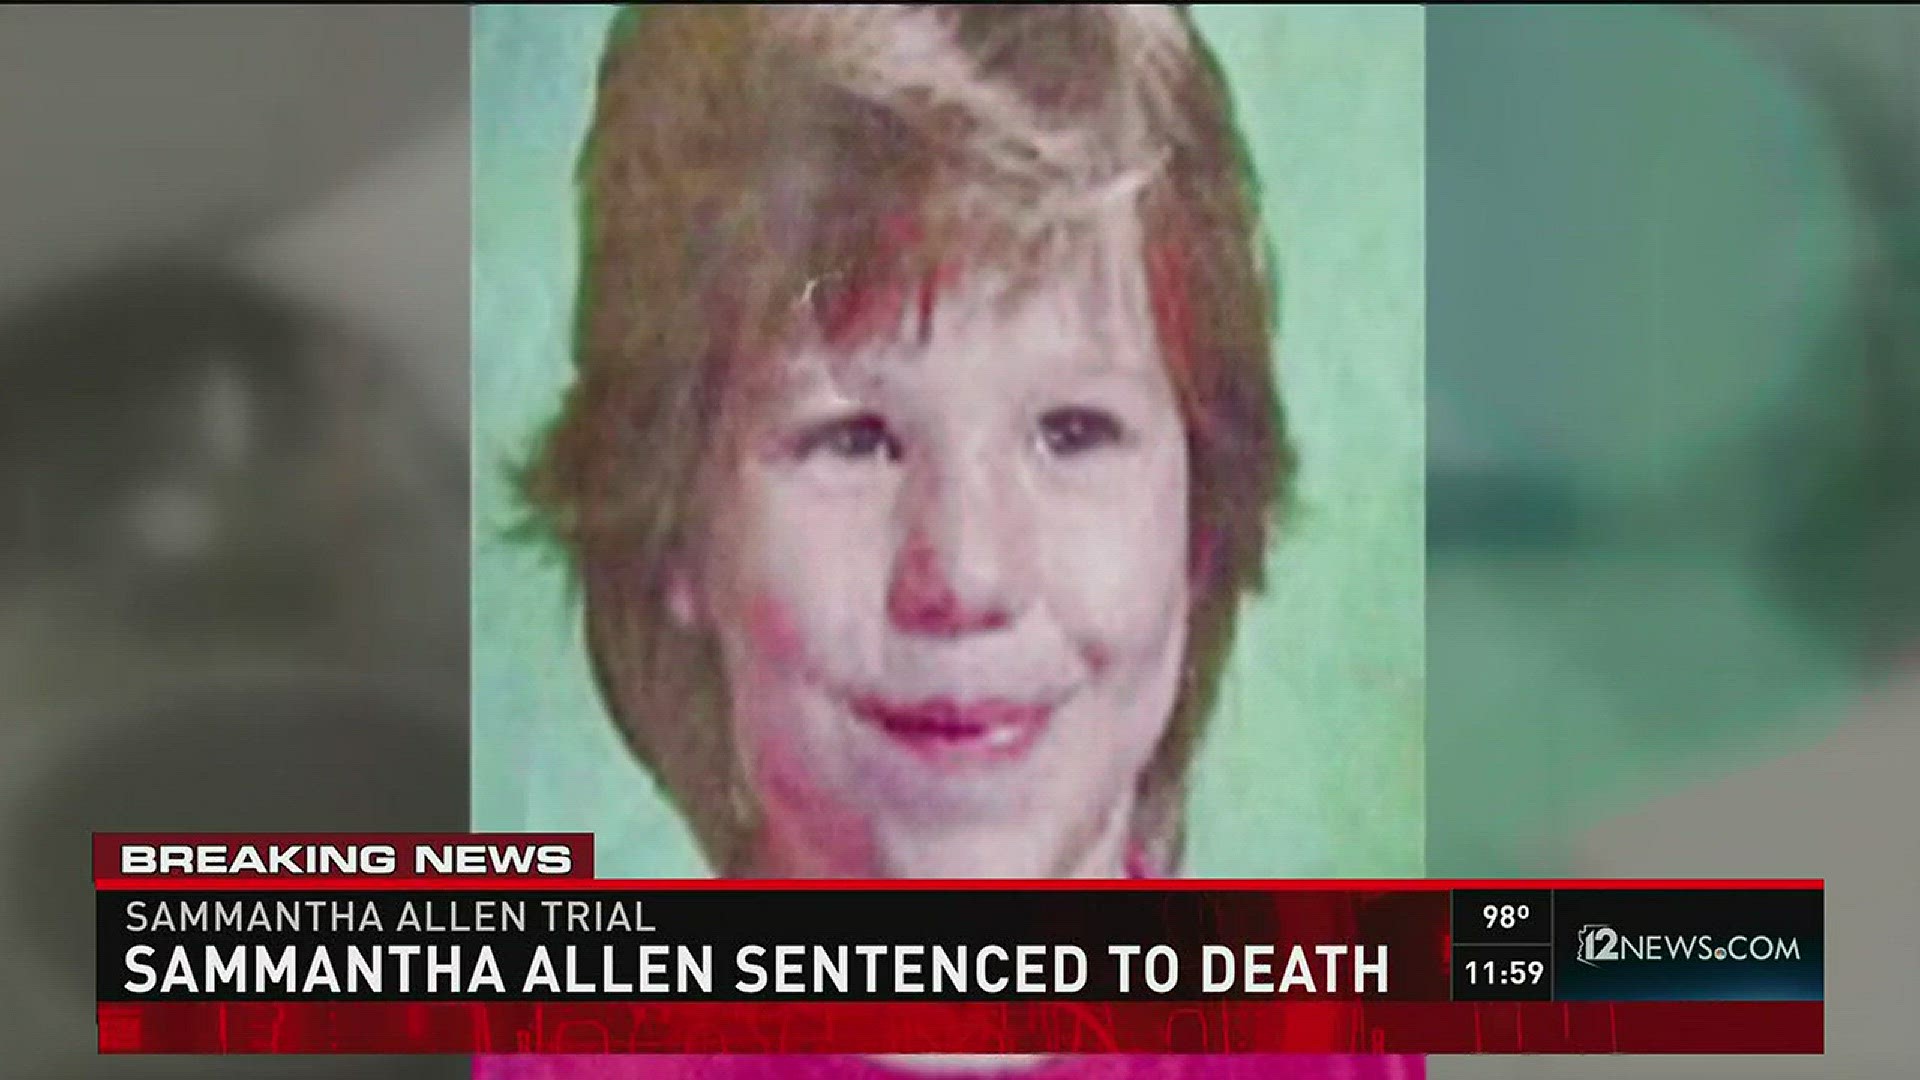 A jury has decided that Samantha Allen will be put to death after killing her 10-year-old cousin.